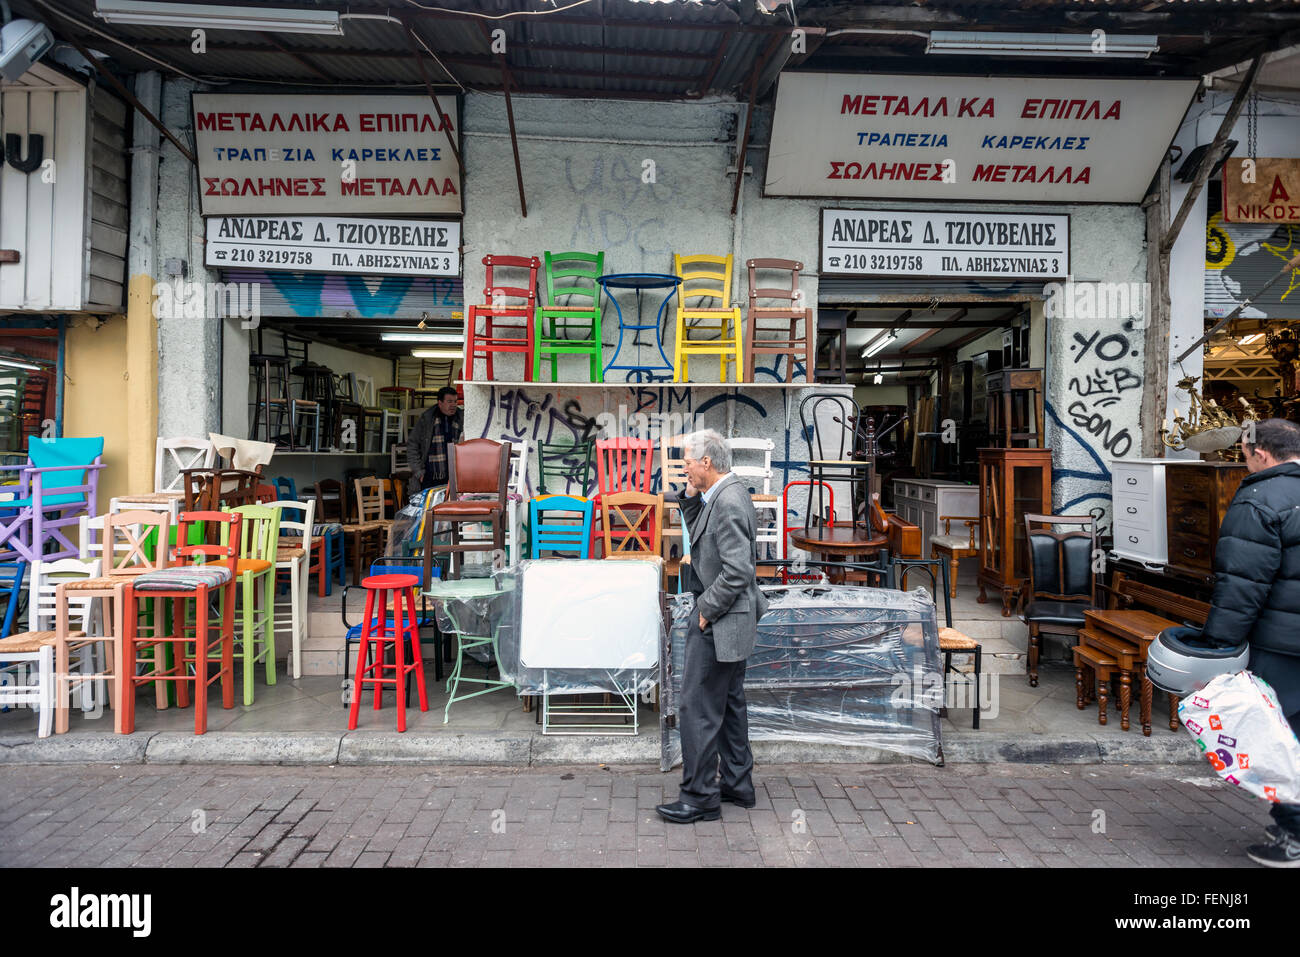 Outside a shop selling metal and chairs in the Monastiraki area of Athens  Greece Stock Photo - Alamy